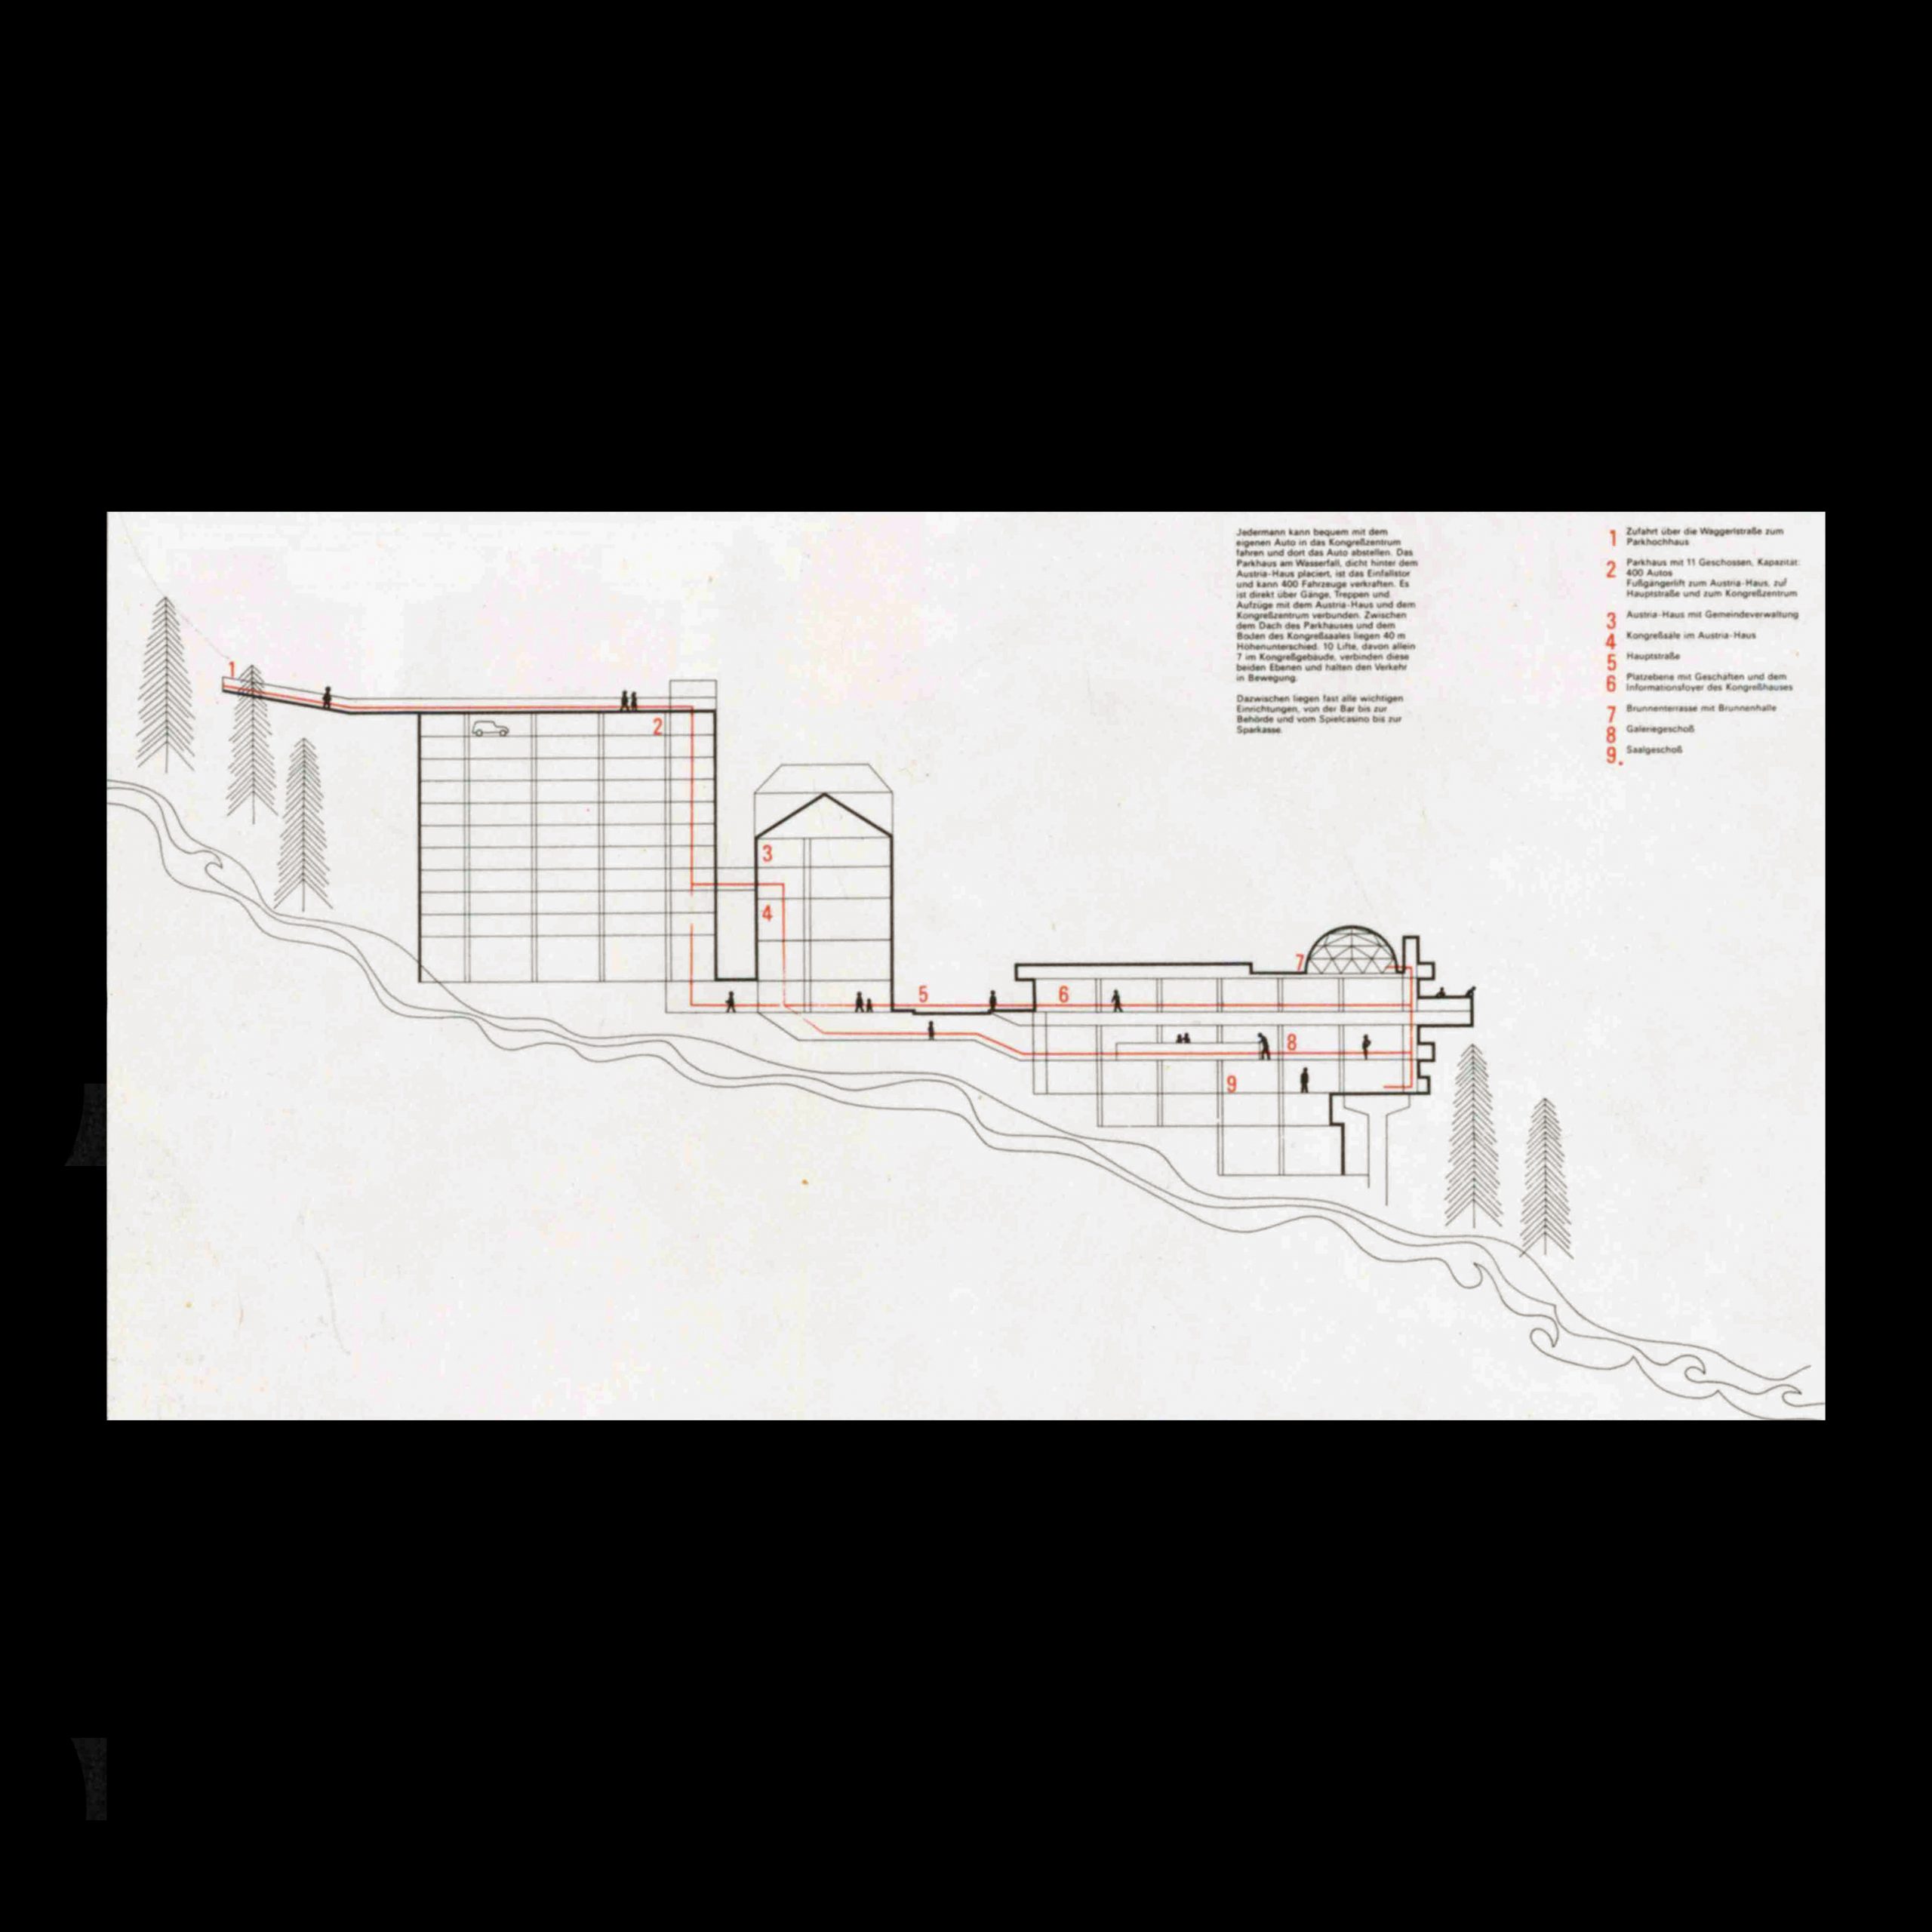 Otl Aicher - Inside of an information brochure showing a cross-section of the Resort and Convention Centre of Badgastein